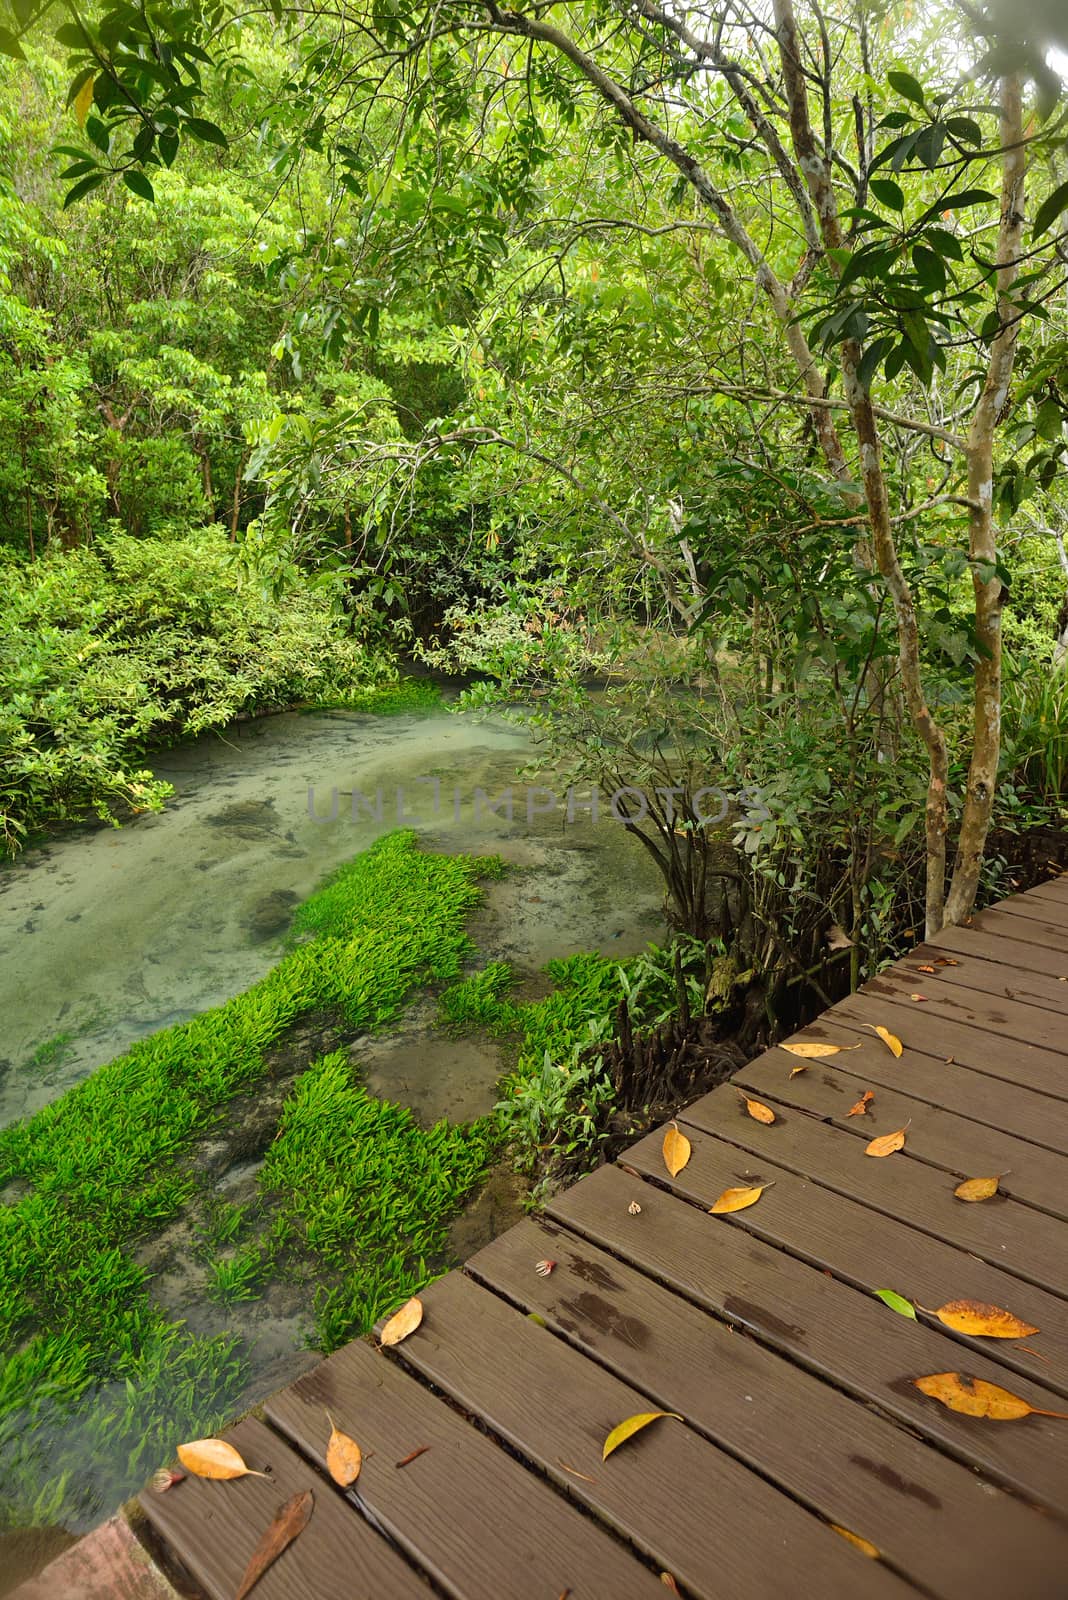 trail in Tha Pom mangroves forest, Krabi, Thailand. by think4photop